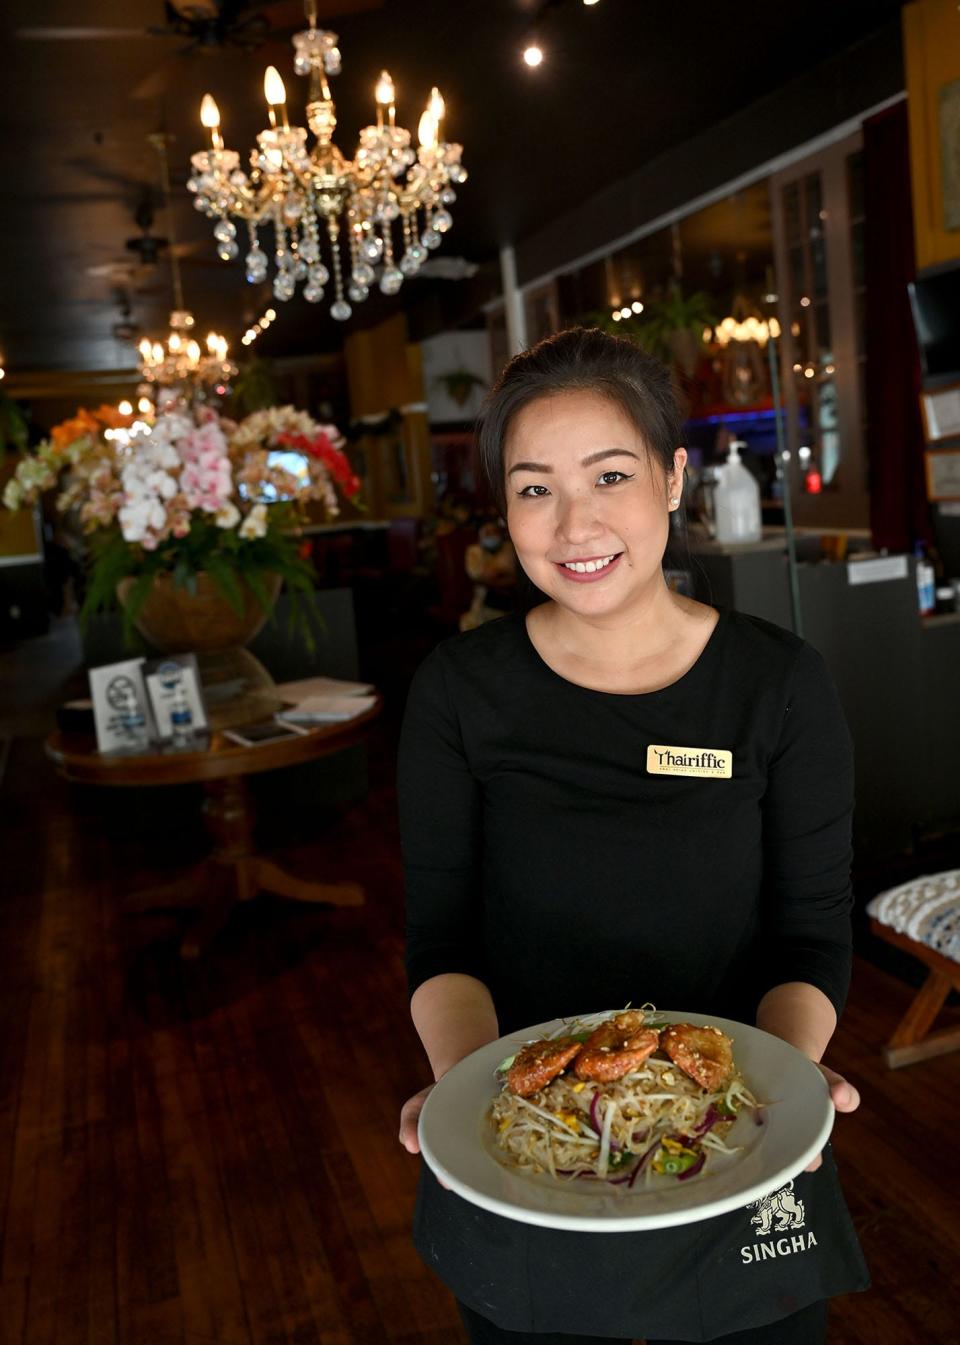 Waitress Yok Leksrisakul with a dish of pad Thai over colossal shrimp   at Thairiffic, a Thai restaurant in downtown Marlborough, May 27, 2022.  